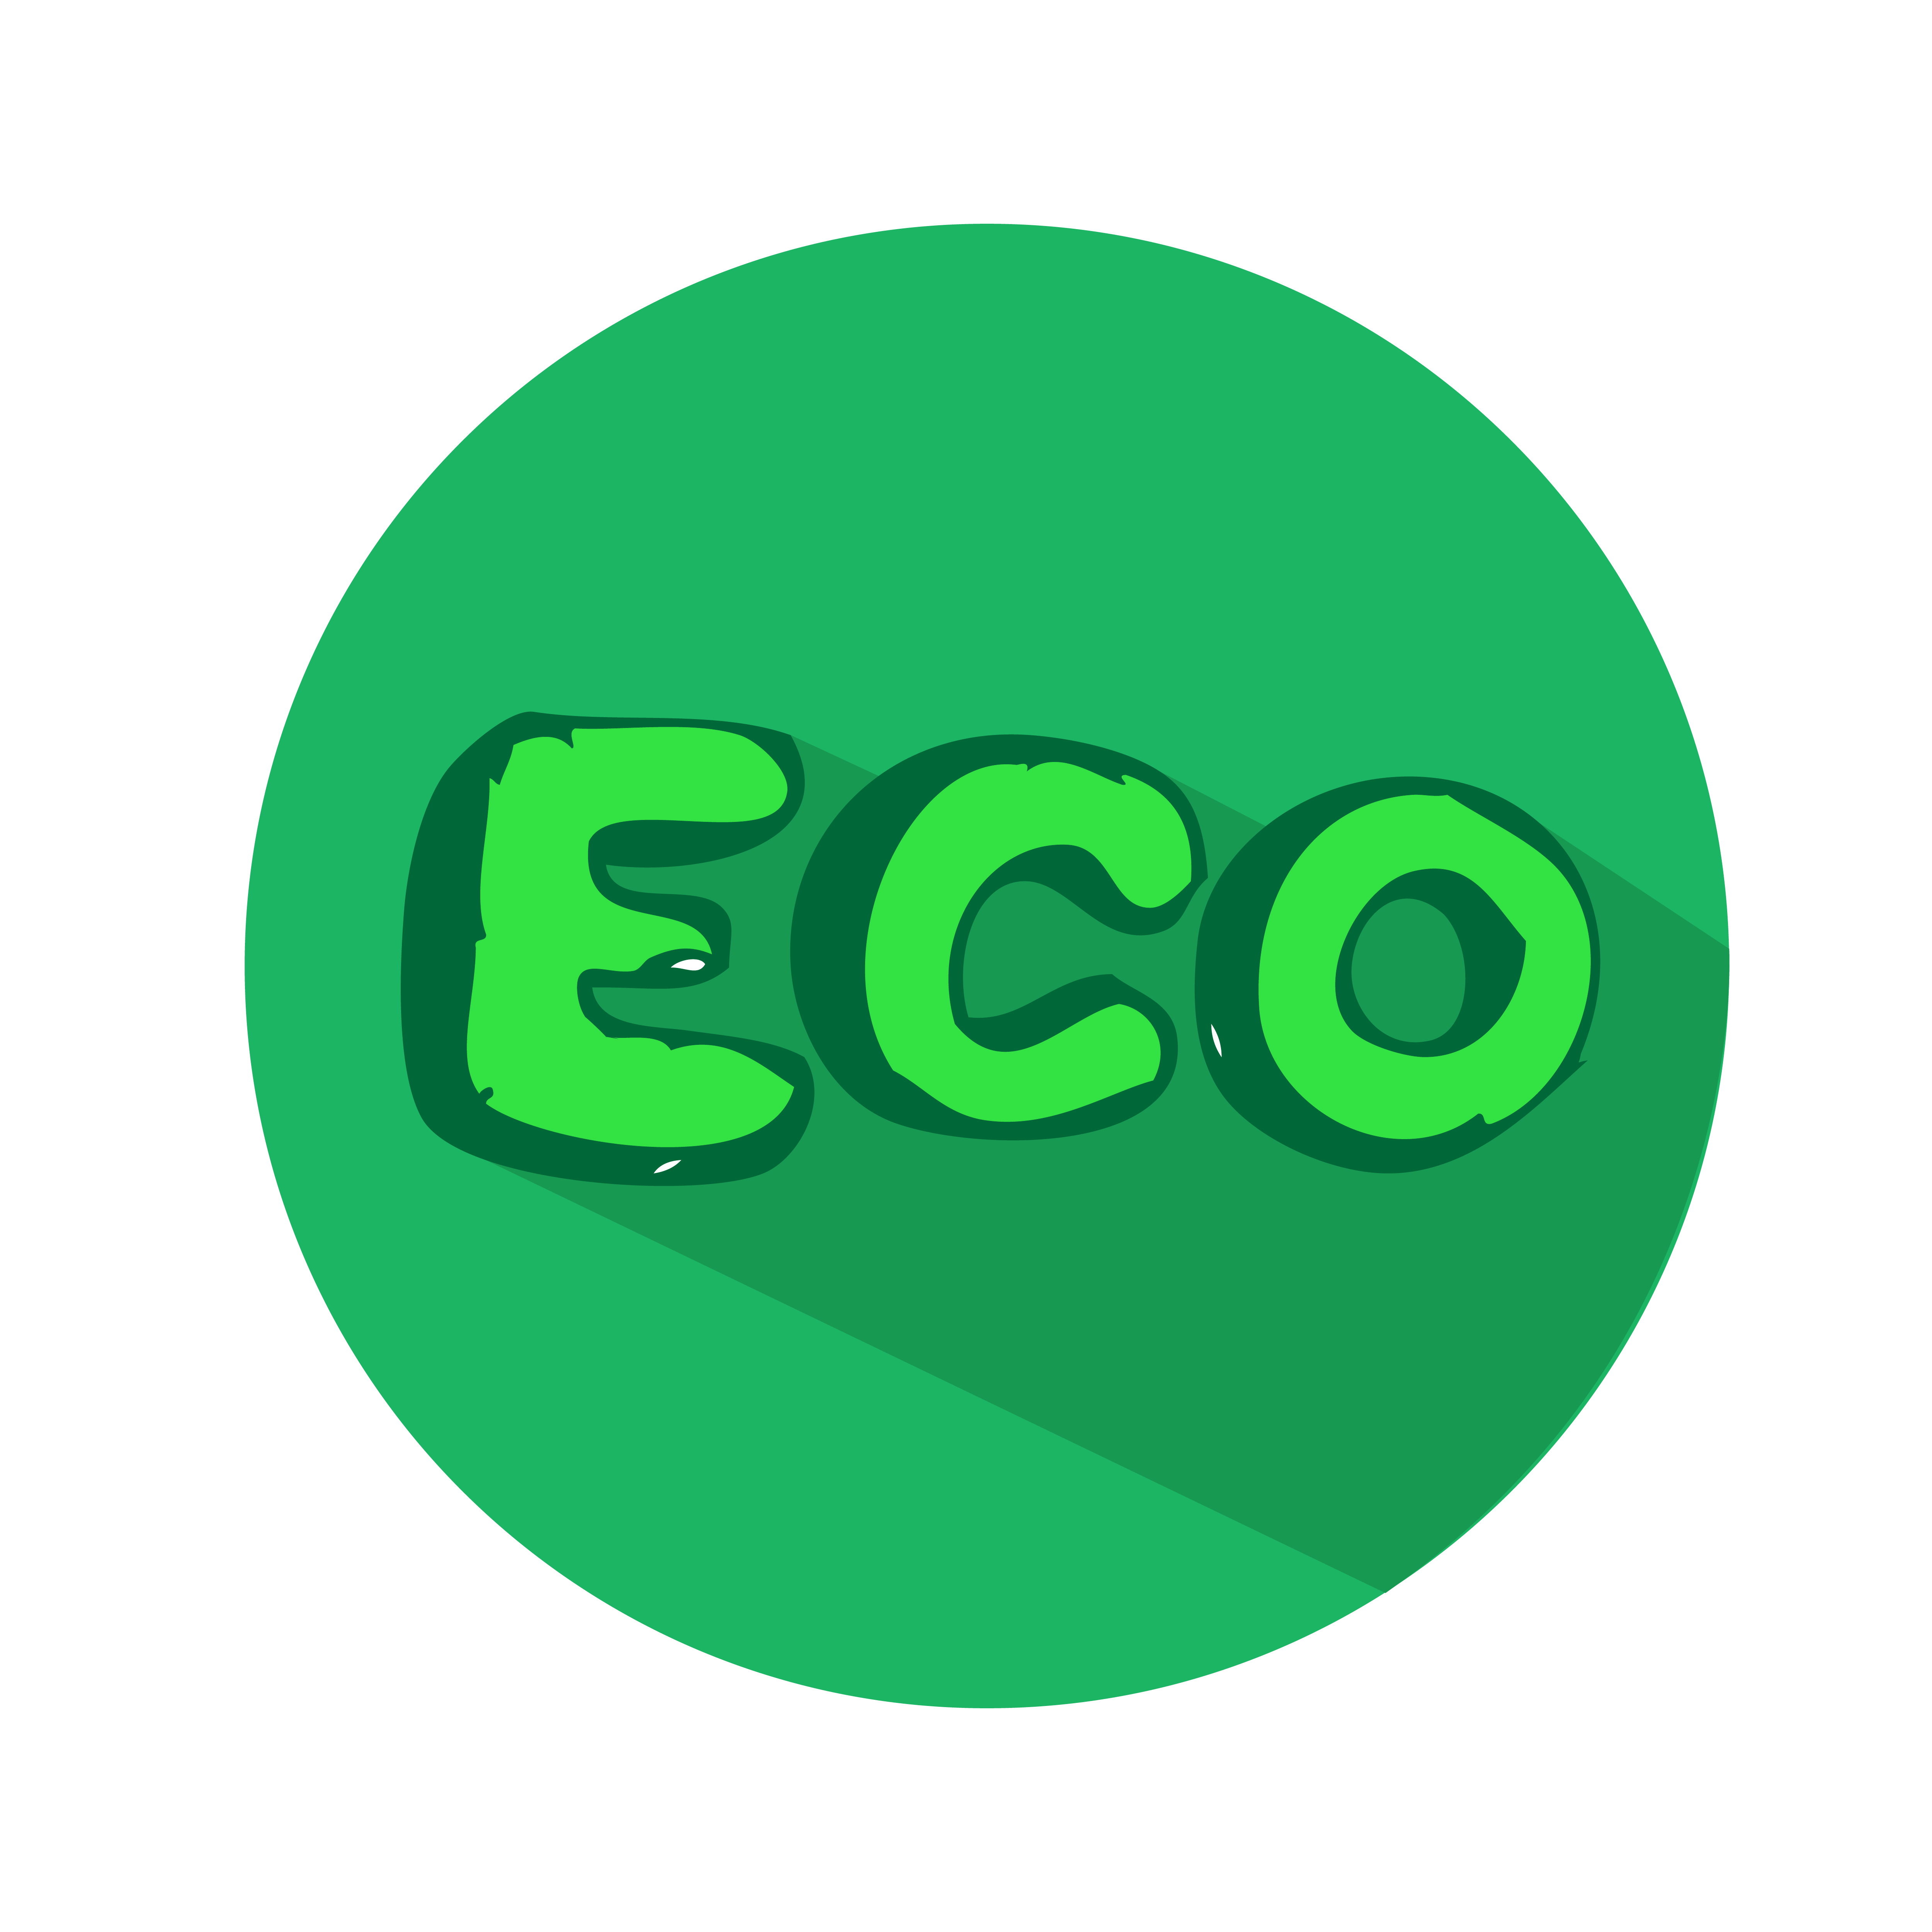 Download eco lettering icon - Download Free Vectors, Clipart ...